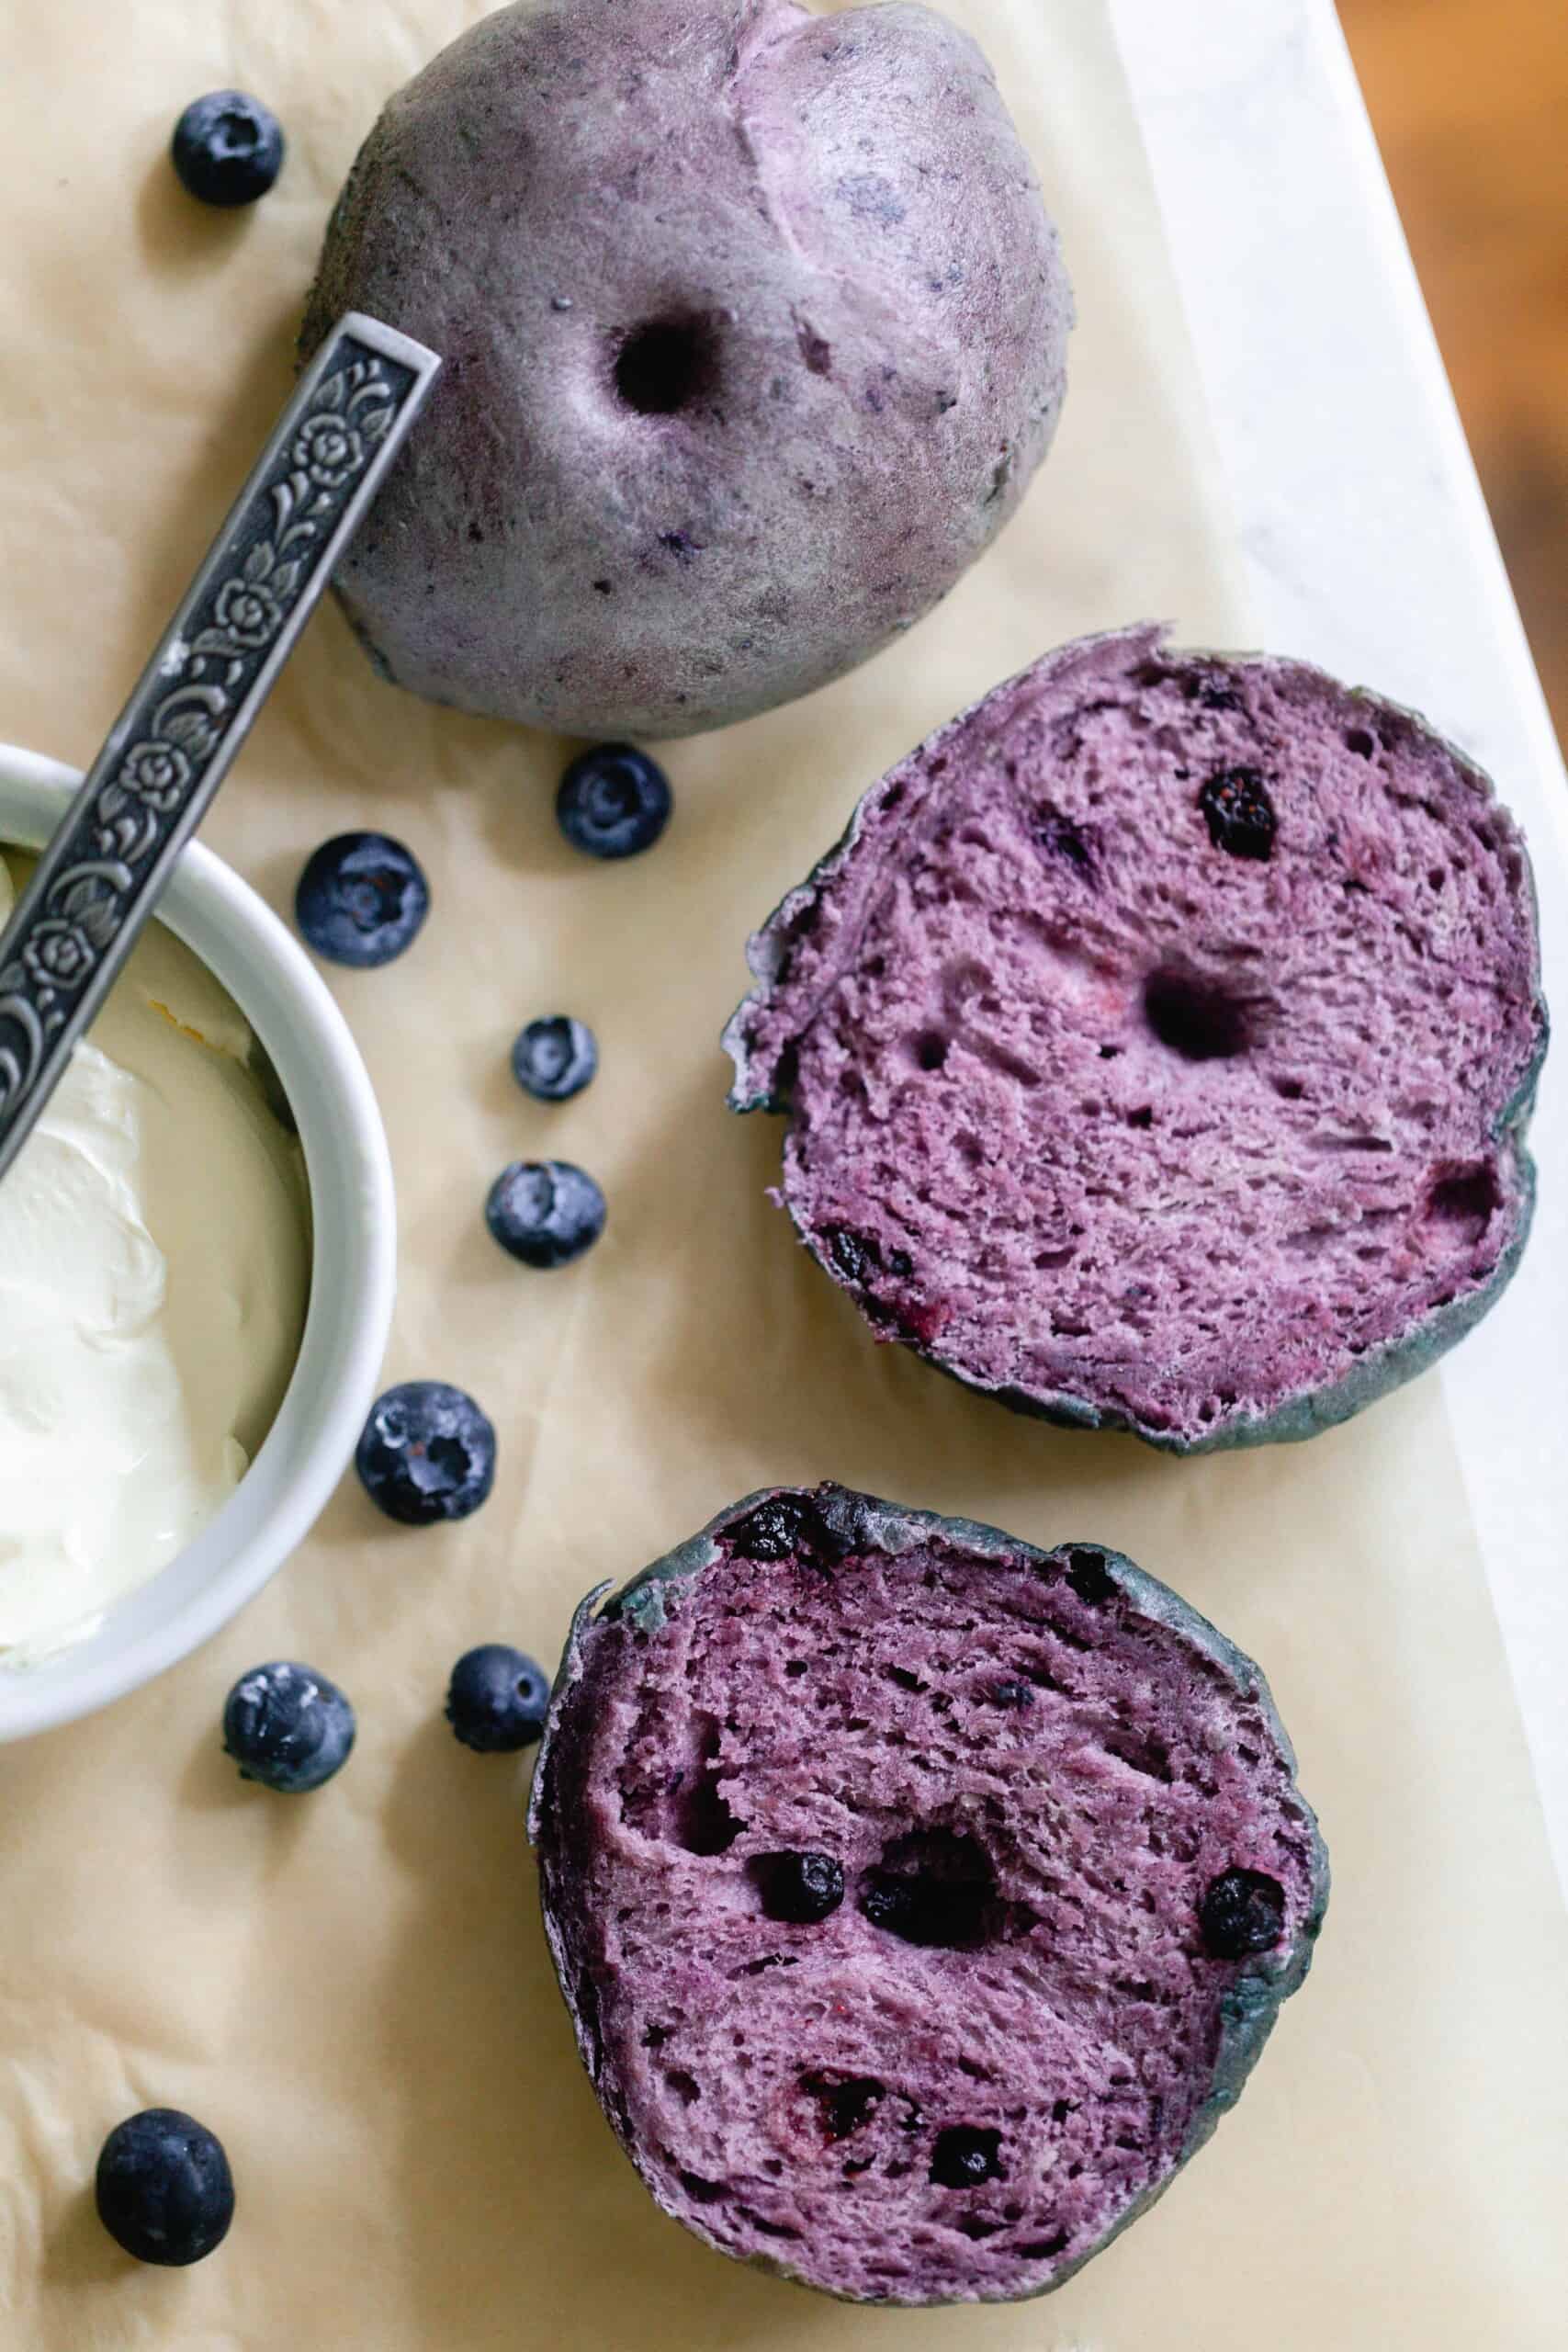 blueberry sourdough bagel sliced in half and another whole bagel on parchment paper with blueberries on parchment paper. A container of cream cheese with a knife is to the left